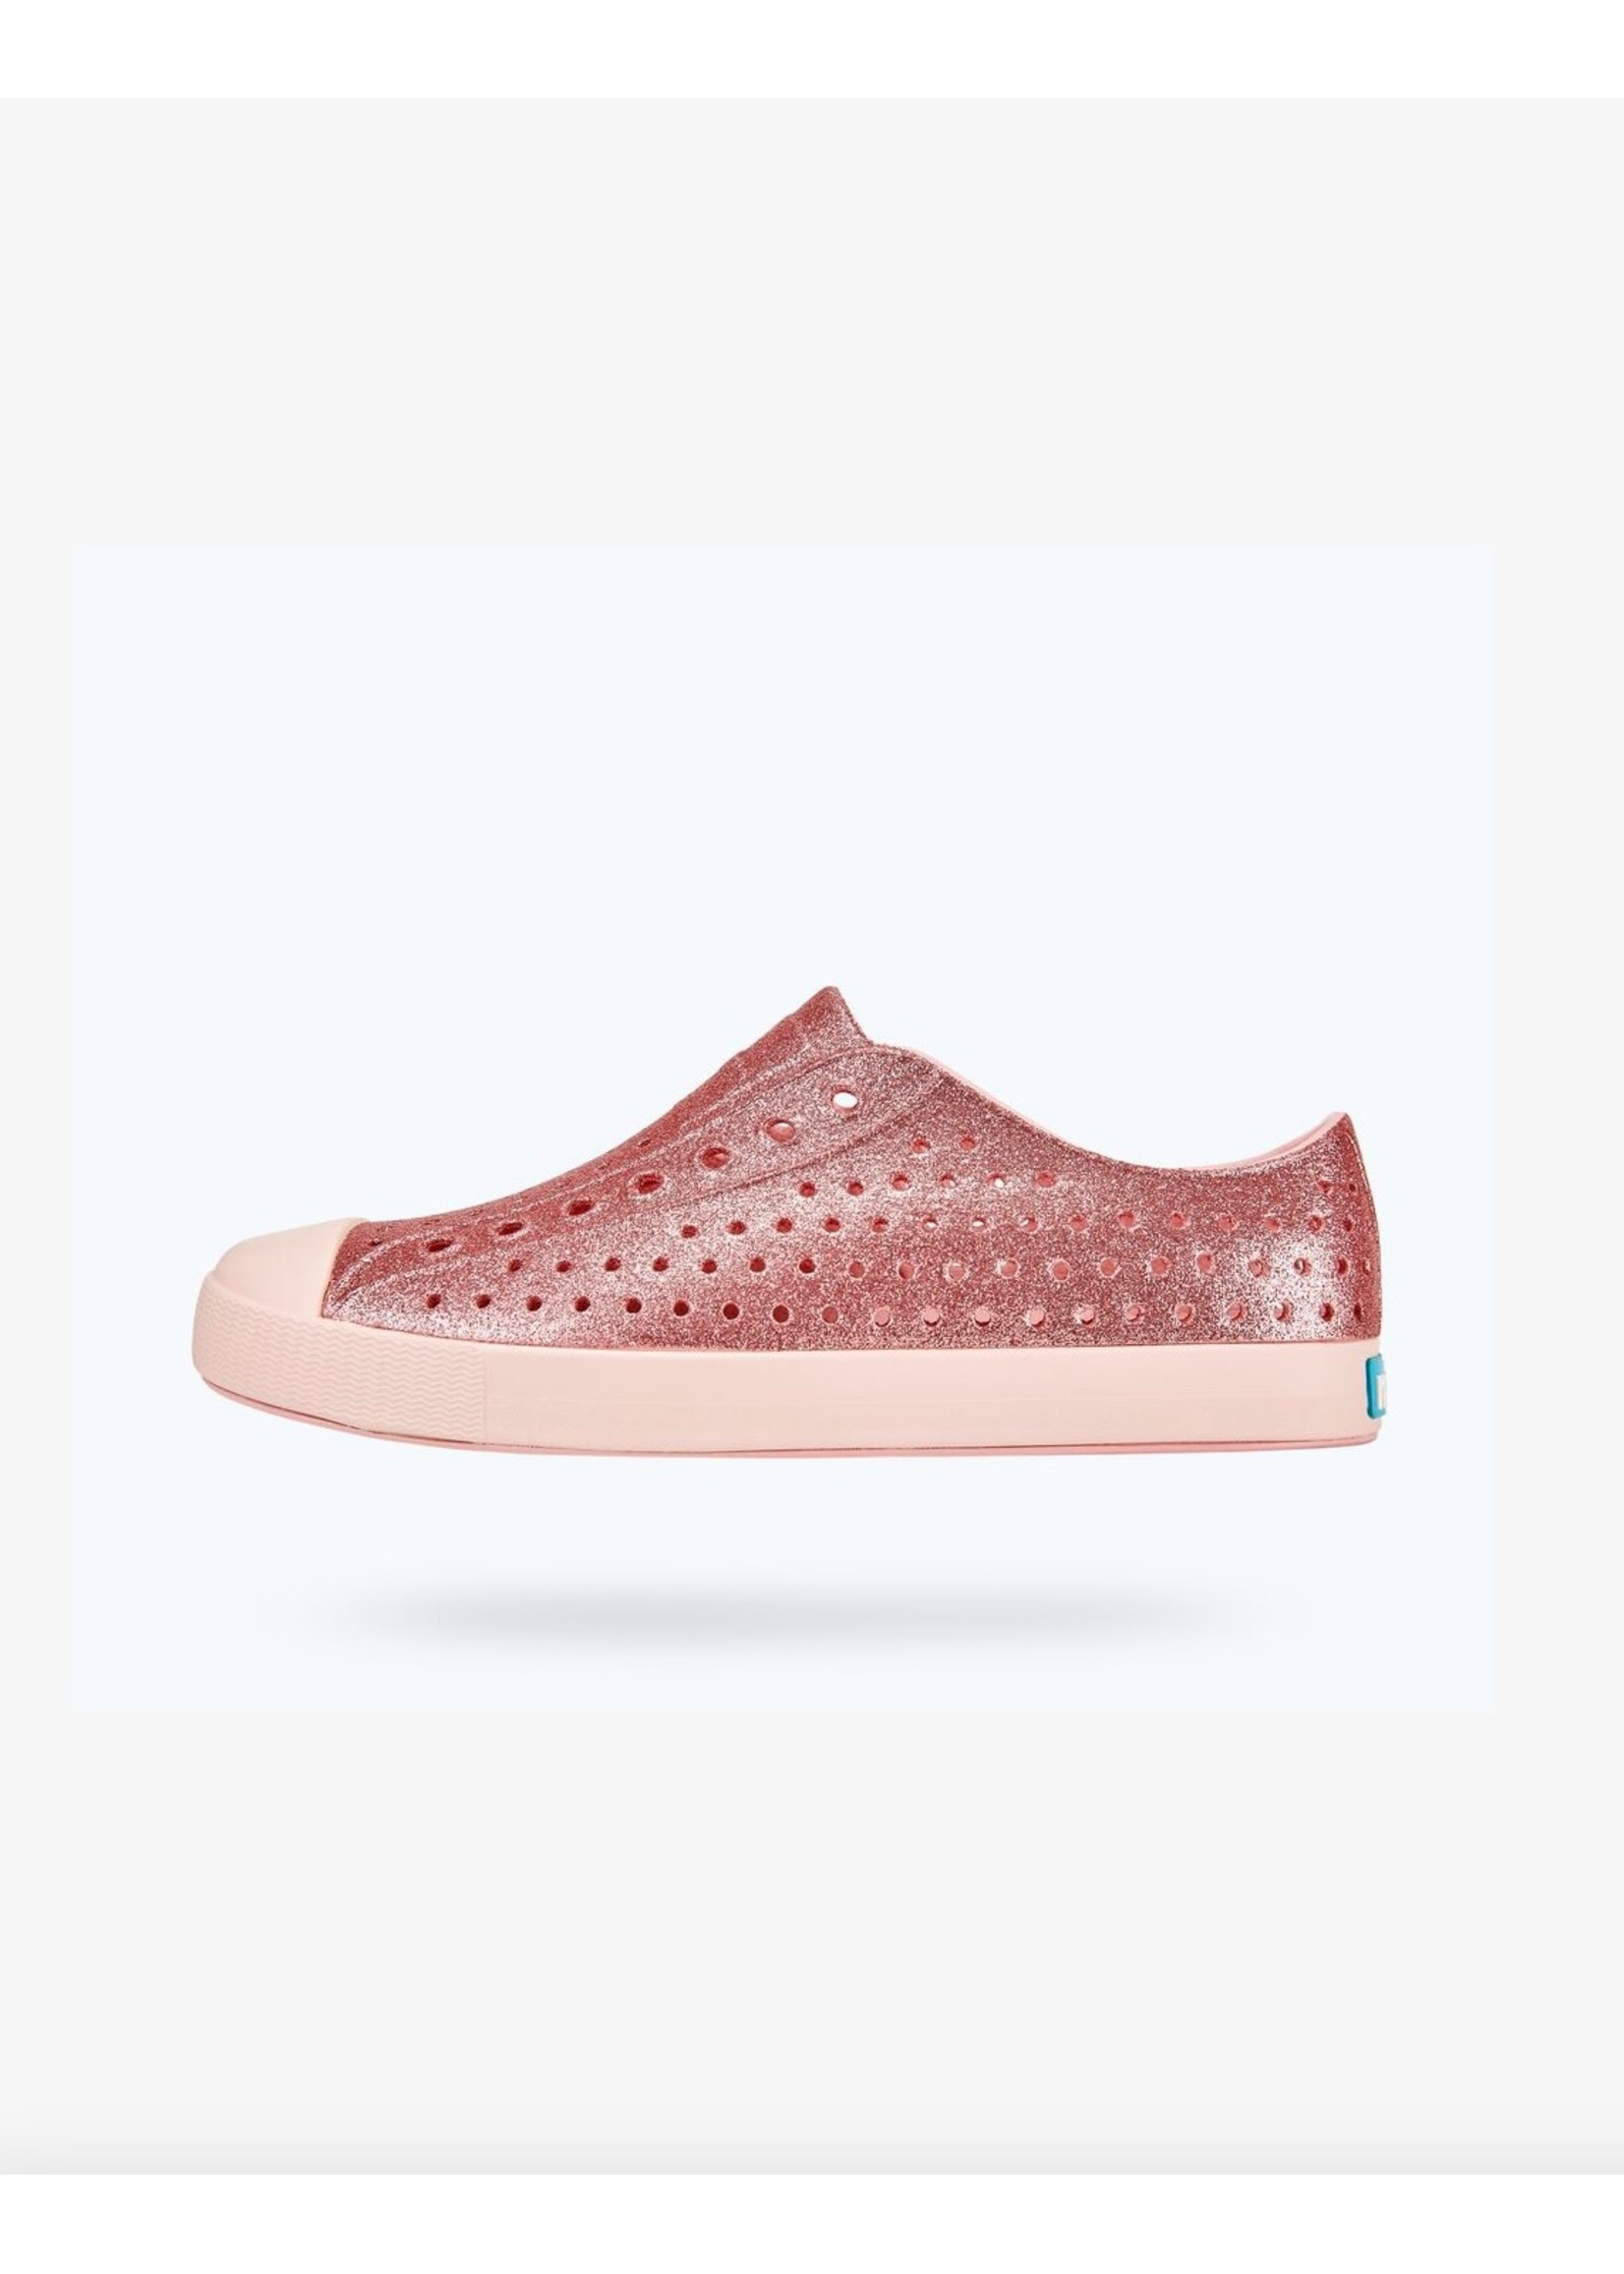 Native Shoes Native Shoes Jefferson Bling Adult in Rose Pink Bling/ Dust Pink